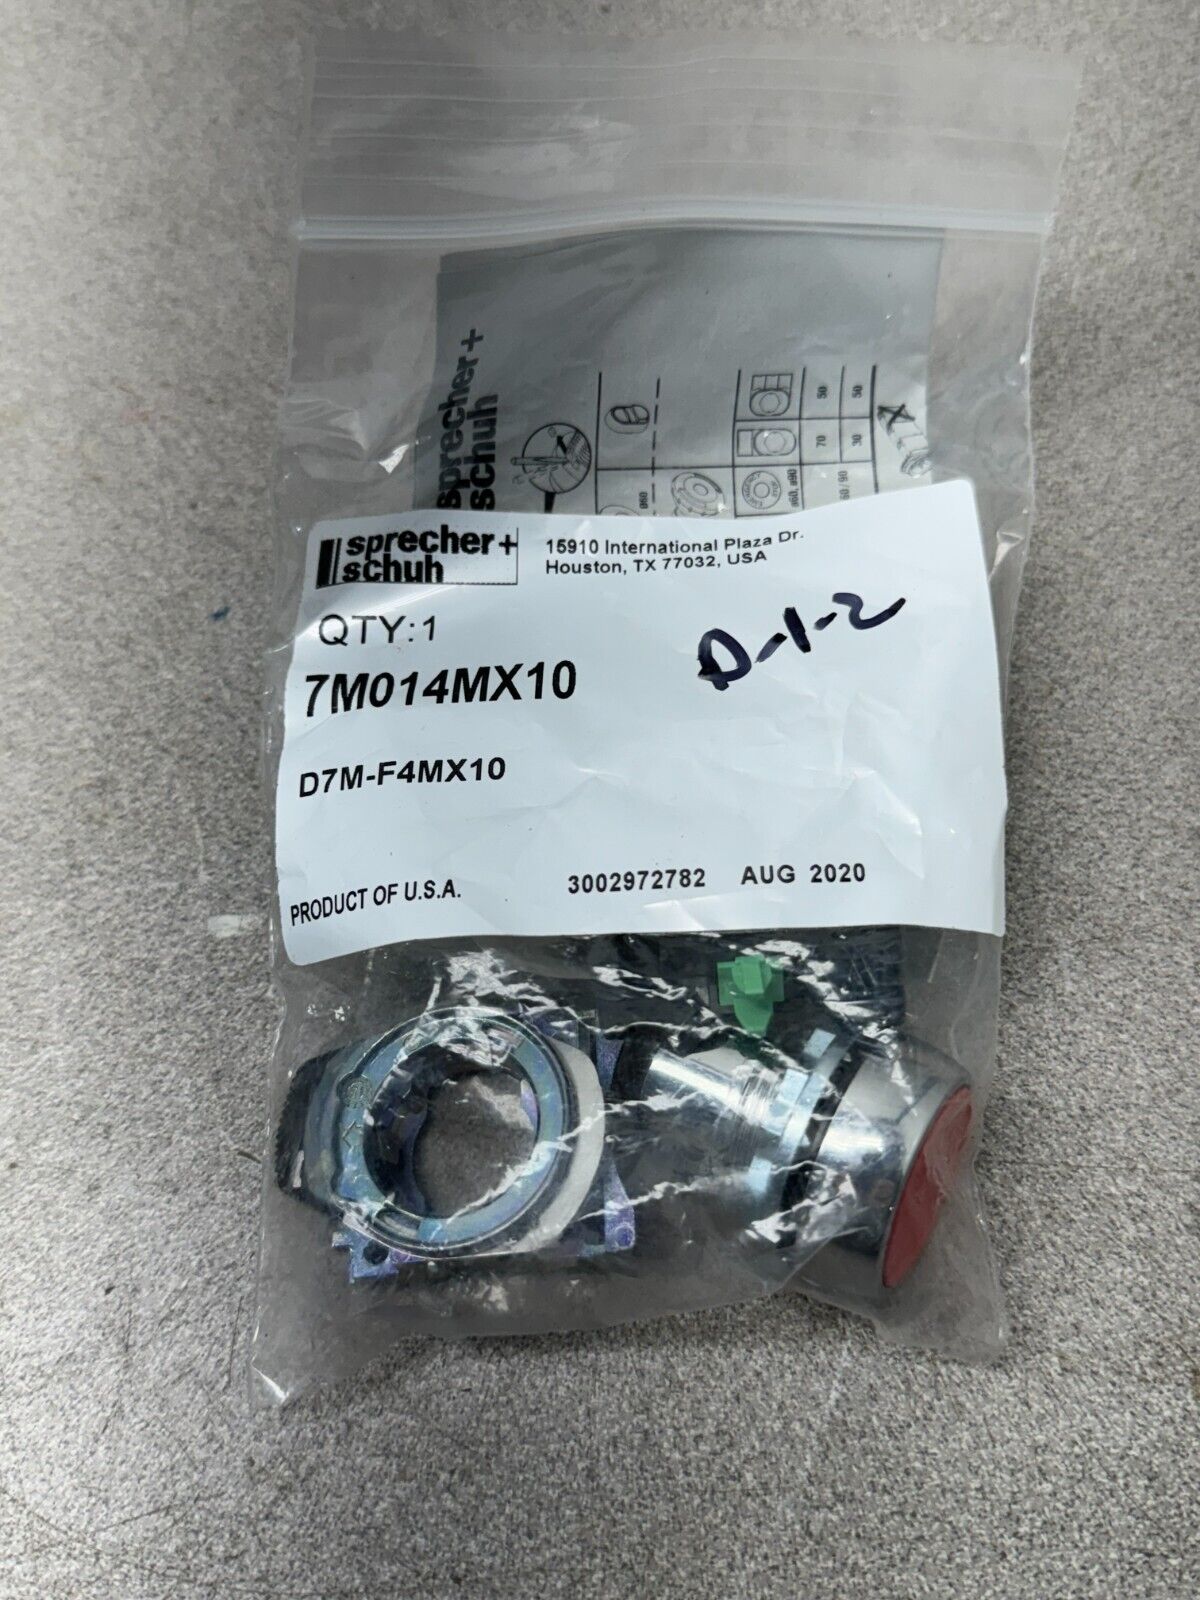 NEW IN PACKAGE SPRECHER SCHUH PUSH BUTTON SWITCH D7M-F4MX10